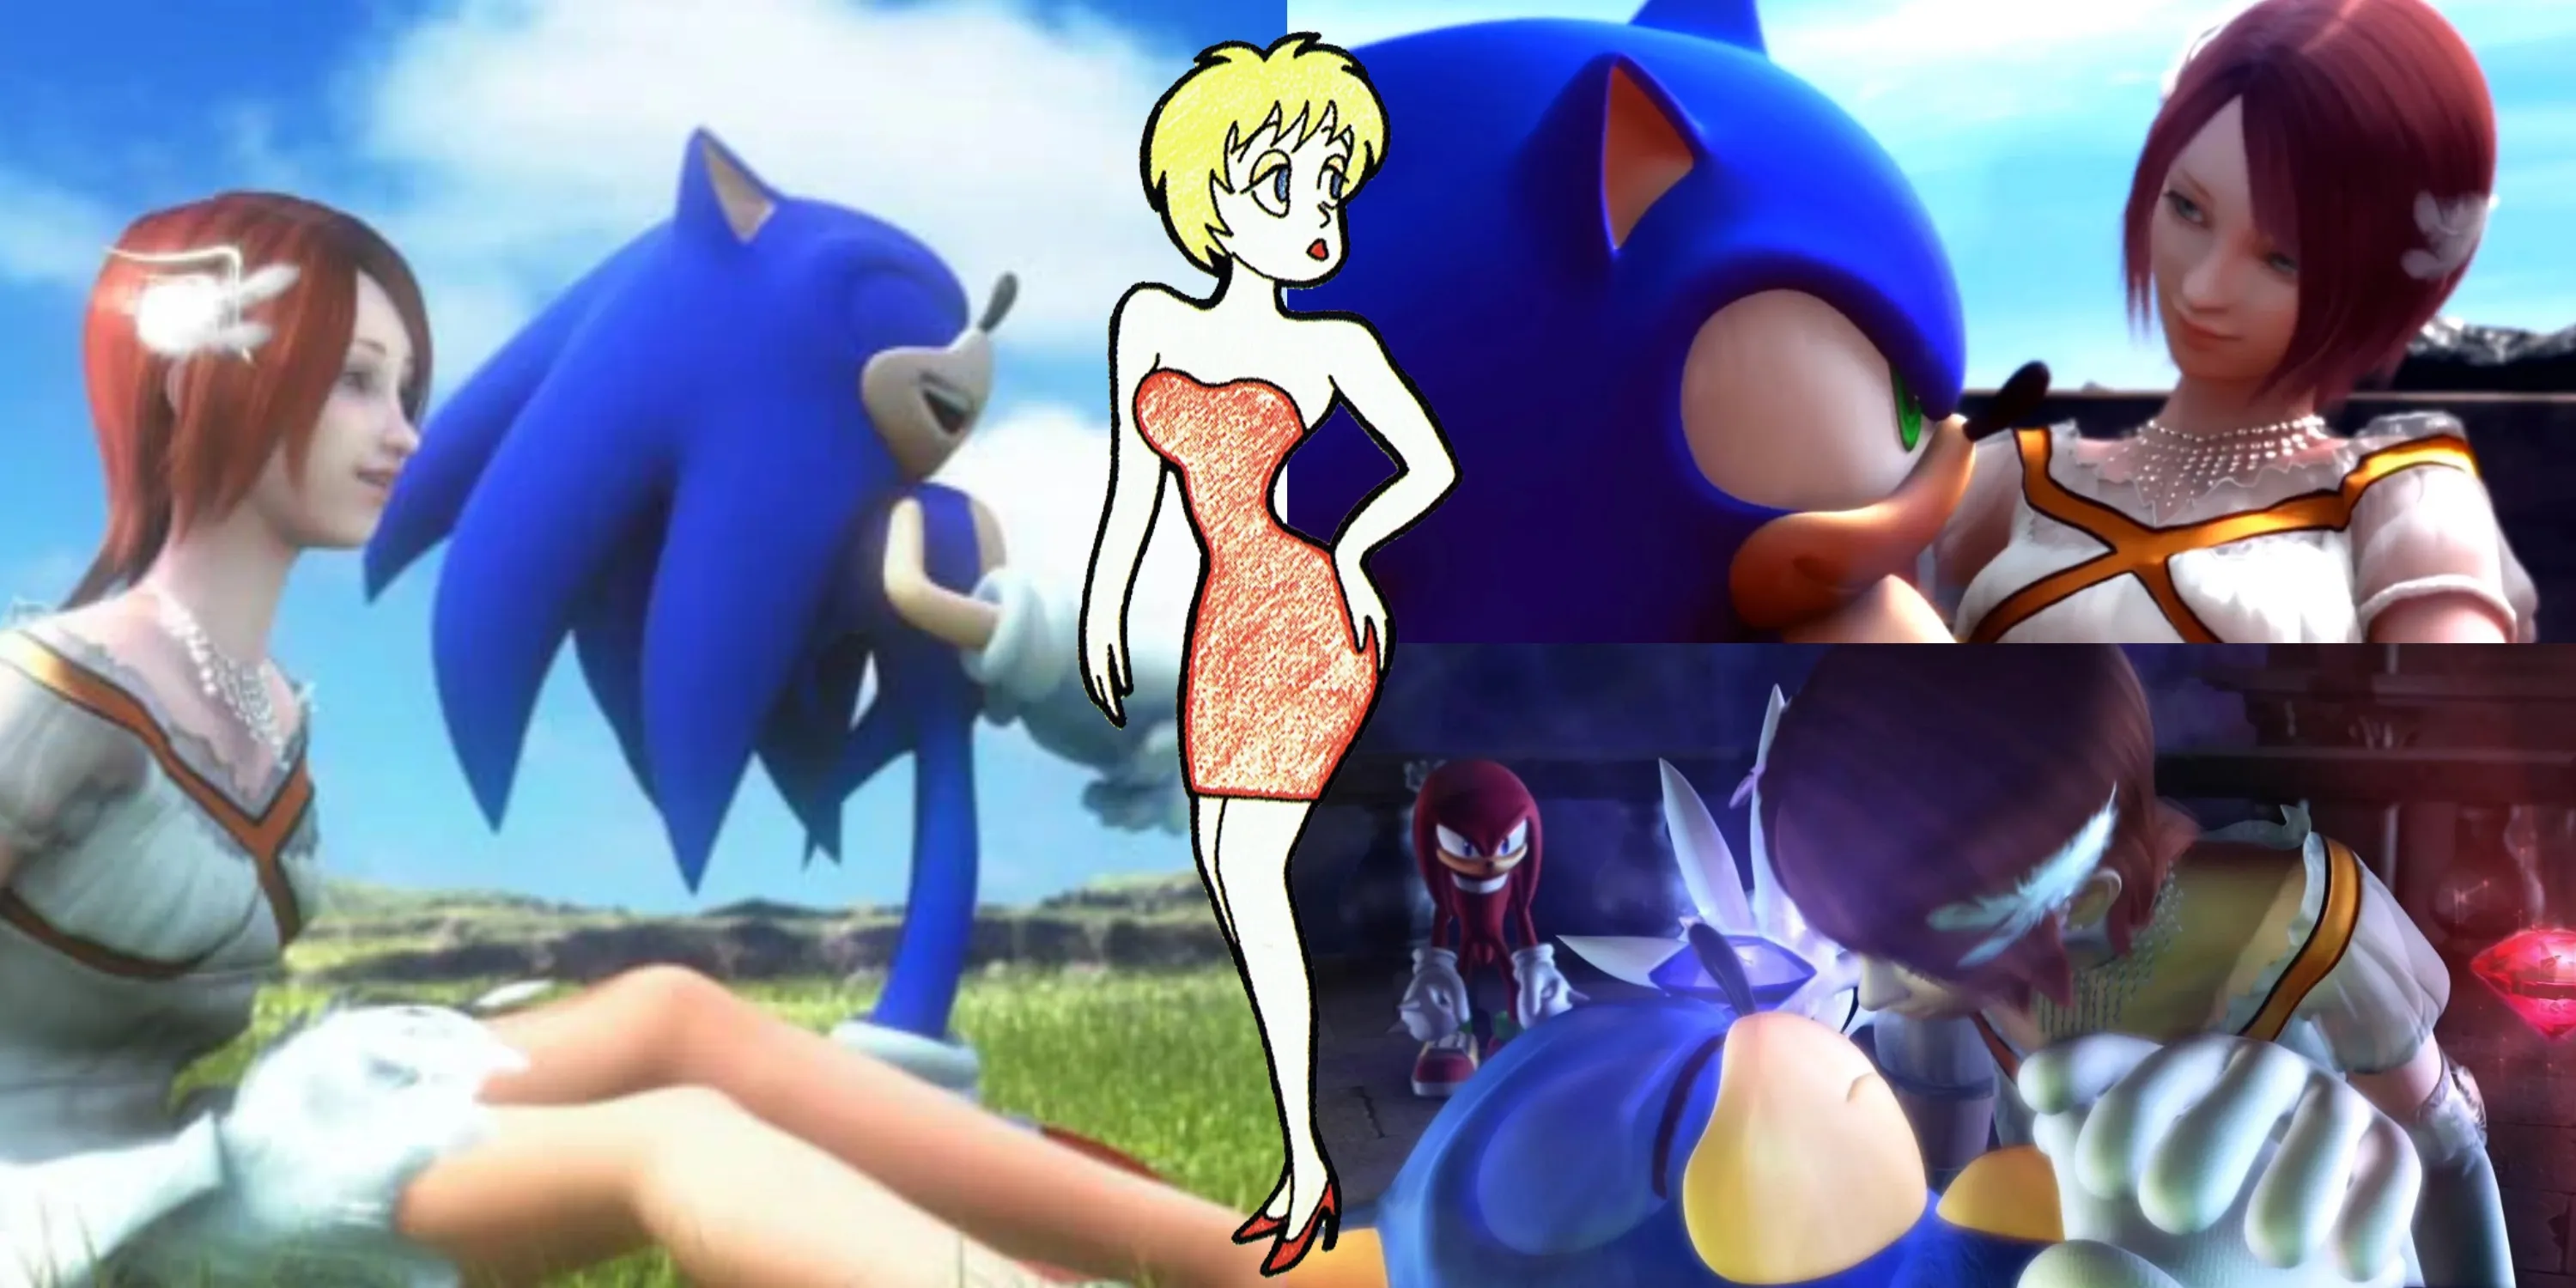 various screenshots of sonic and princess Elise, with abandoned concept art for the character